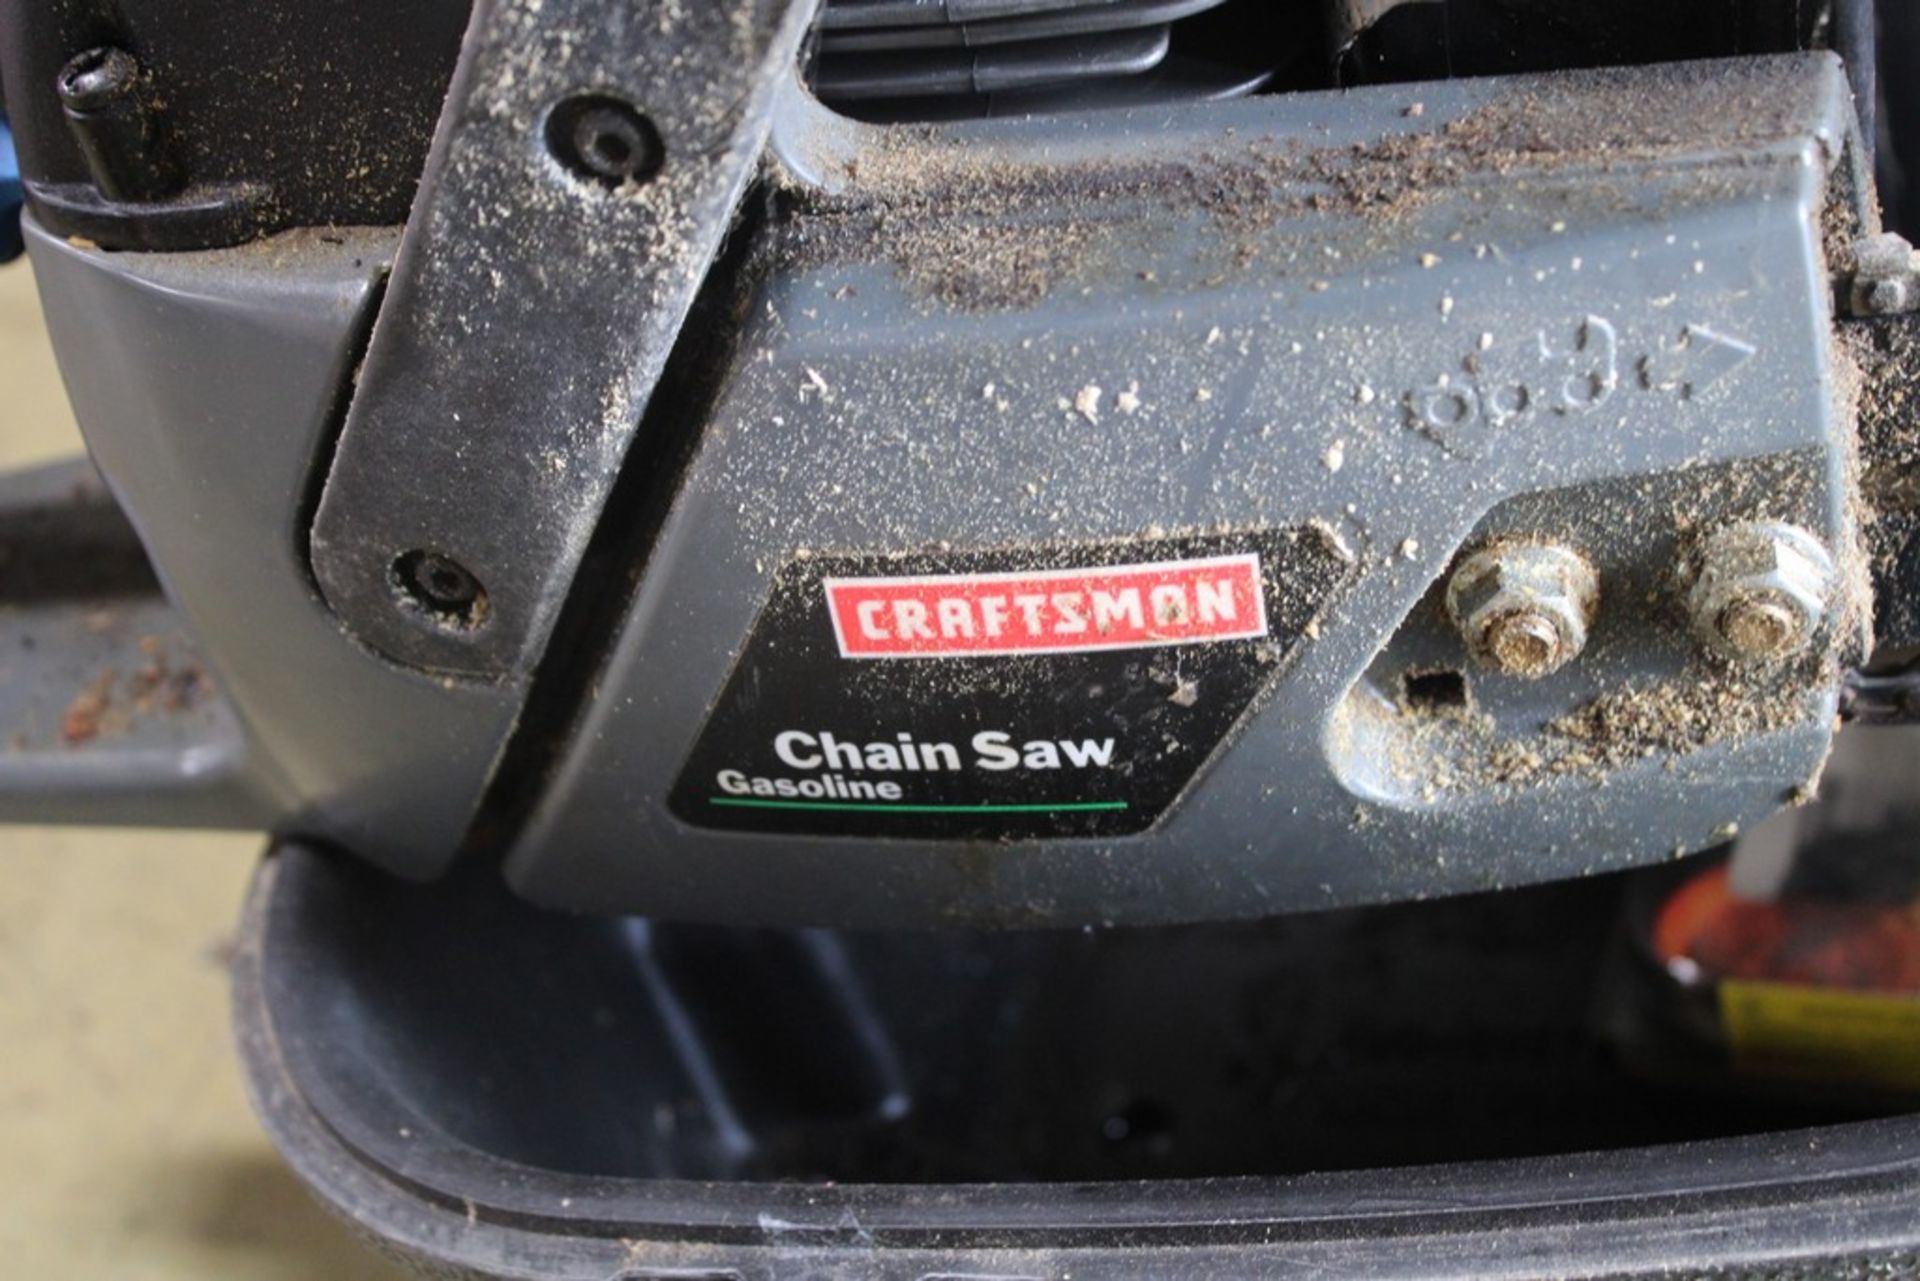 CRAFTSMAN 16" CHAIN SAW 2.2 / 36 CC ENGINE WITH EXTRA CHAIN & CASE - Image 3 of 3